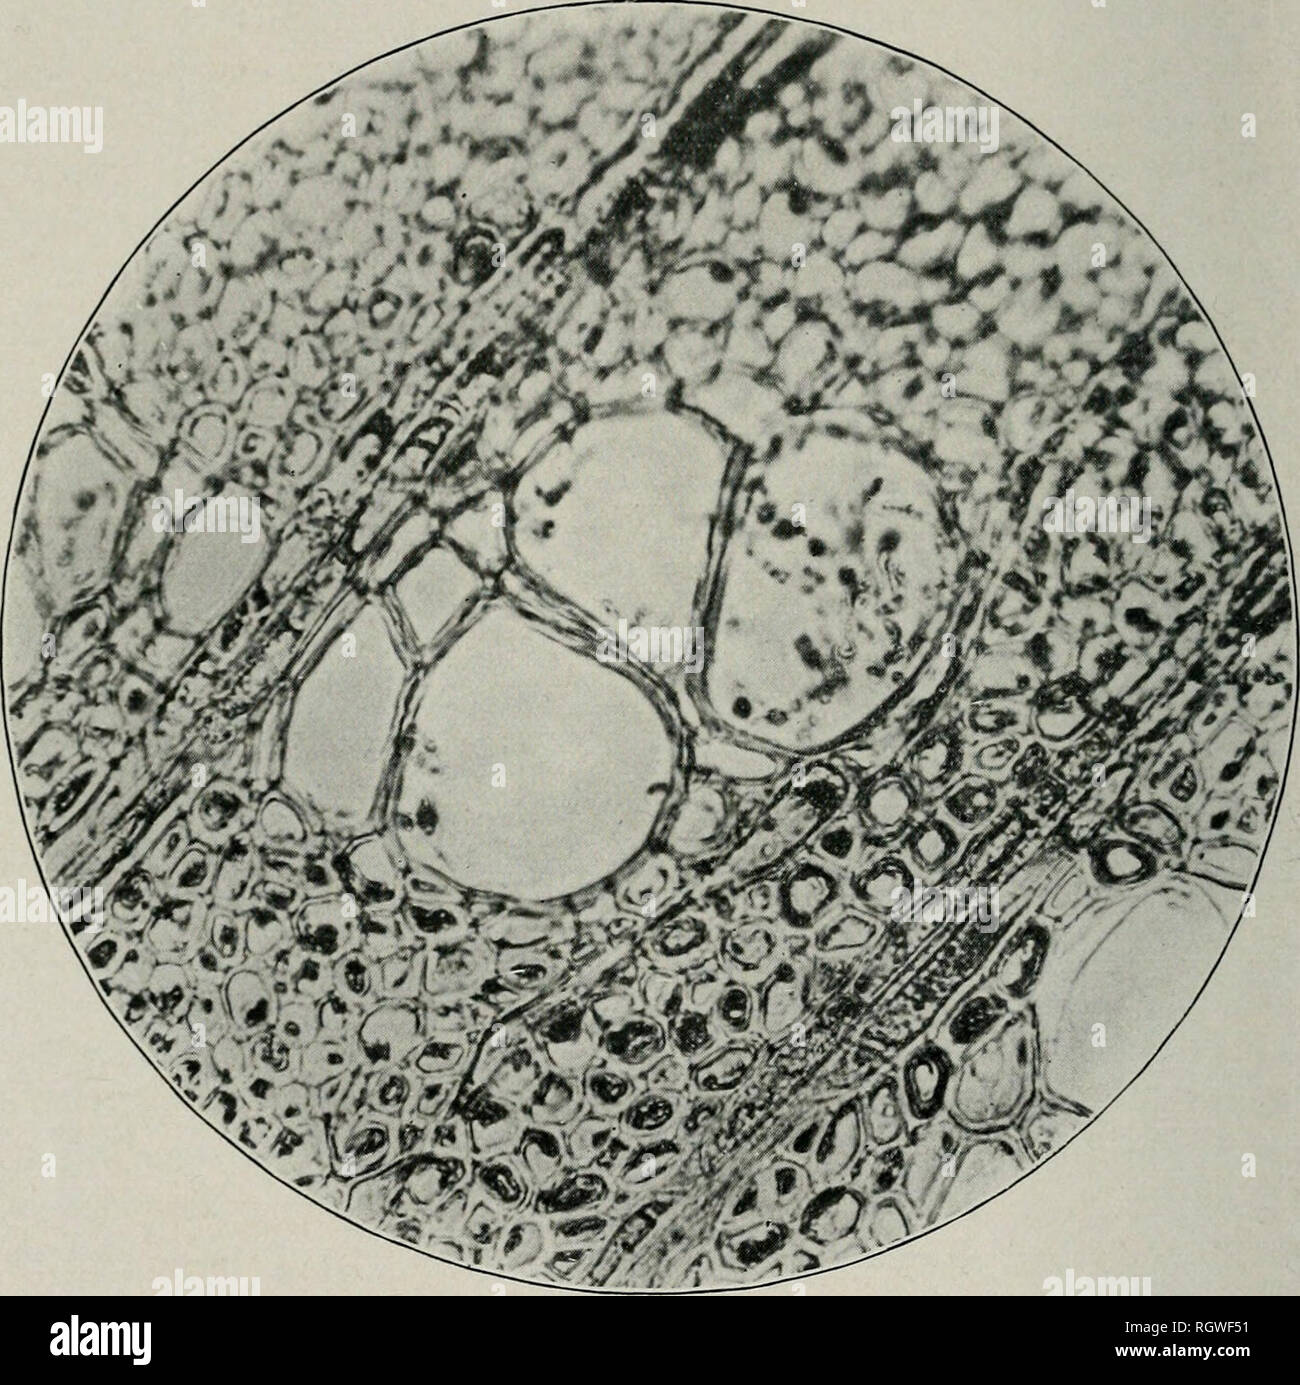 . Bulletin. Natural history; Natural history. 26 ILLINOIS NATURAL HISTORY SURVEY BULLETIN. Fig. 12.—Photomicrographic cross section, X 450, of Coniothyrium-in- fected elm wood, in wliich a large water duct is nearly plugged by the massed hyphae of the fungus. less diffused and to be present chiefly in the cankered side of the stem. In the wood last formed the discoloration is darker and heavier. Very often the discoloration in the sapwood may form an almost continuous circle in the stem, but just as often the discoloration may appear in small scattered areas. The smaller discolored areas are n Stock Photo